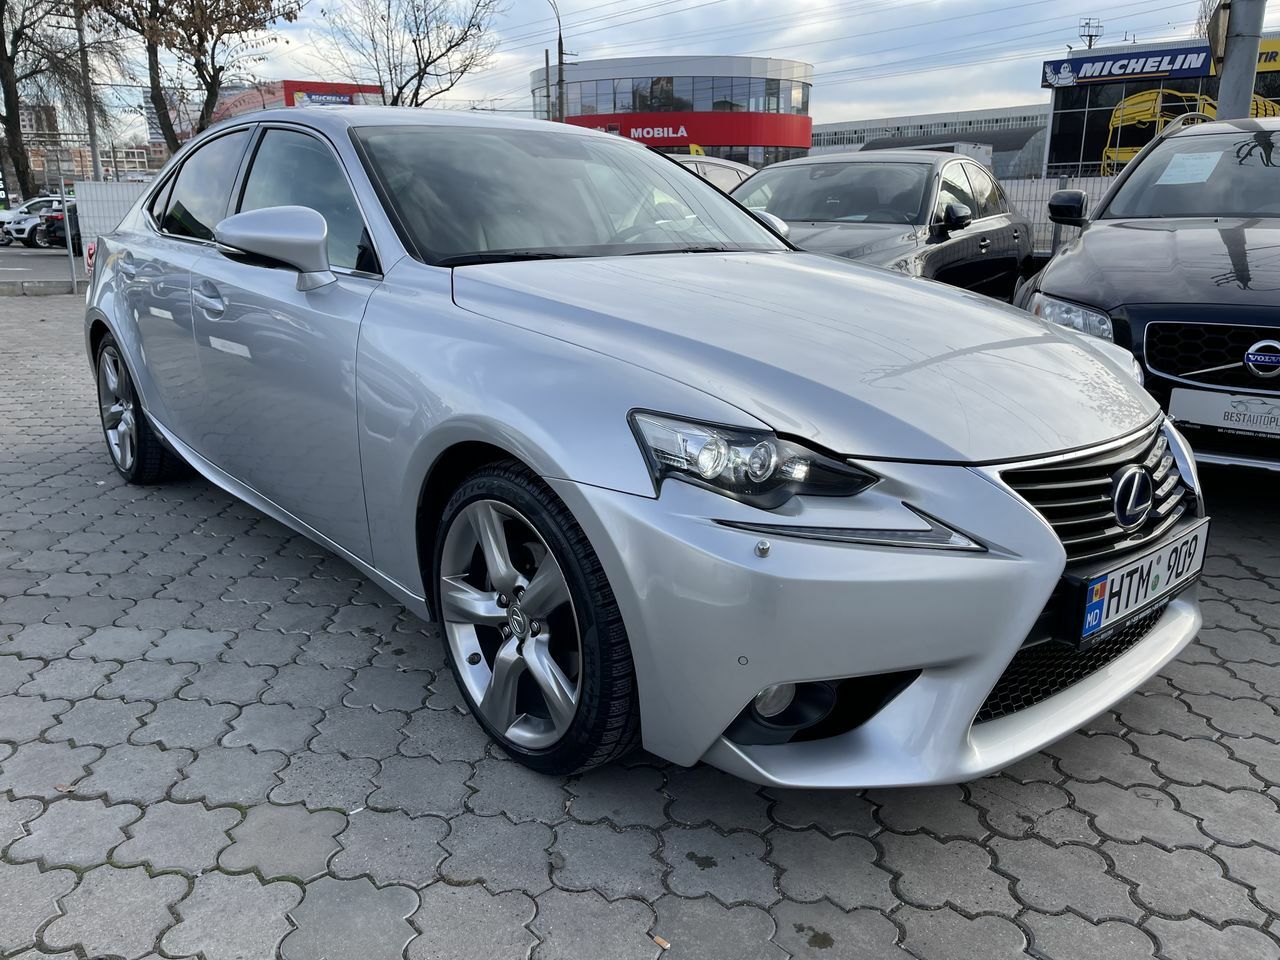 <span style="font-weight: bold;">lexus is 300h</span>